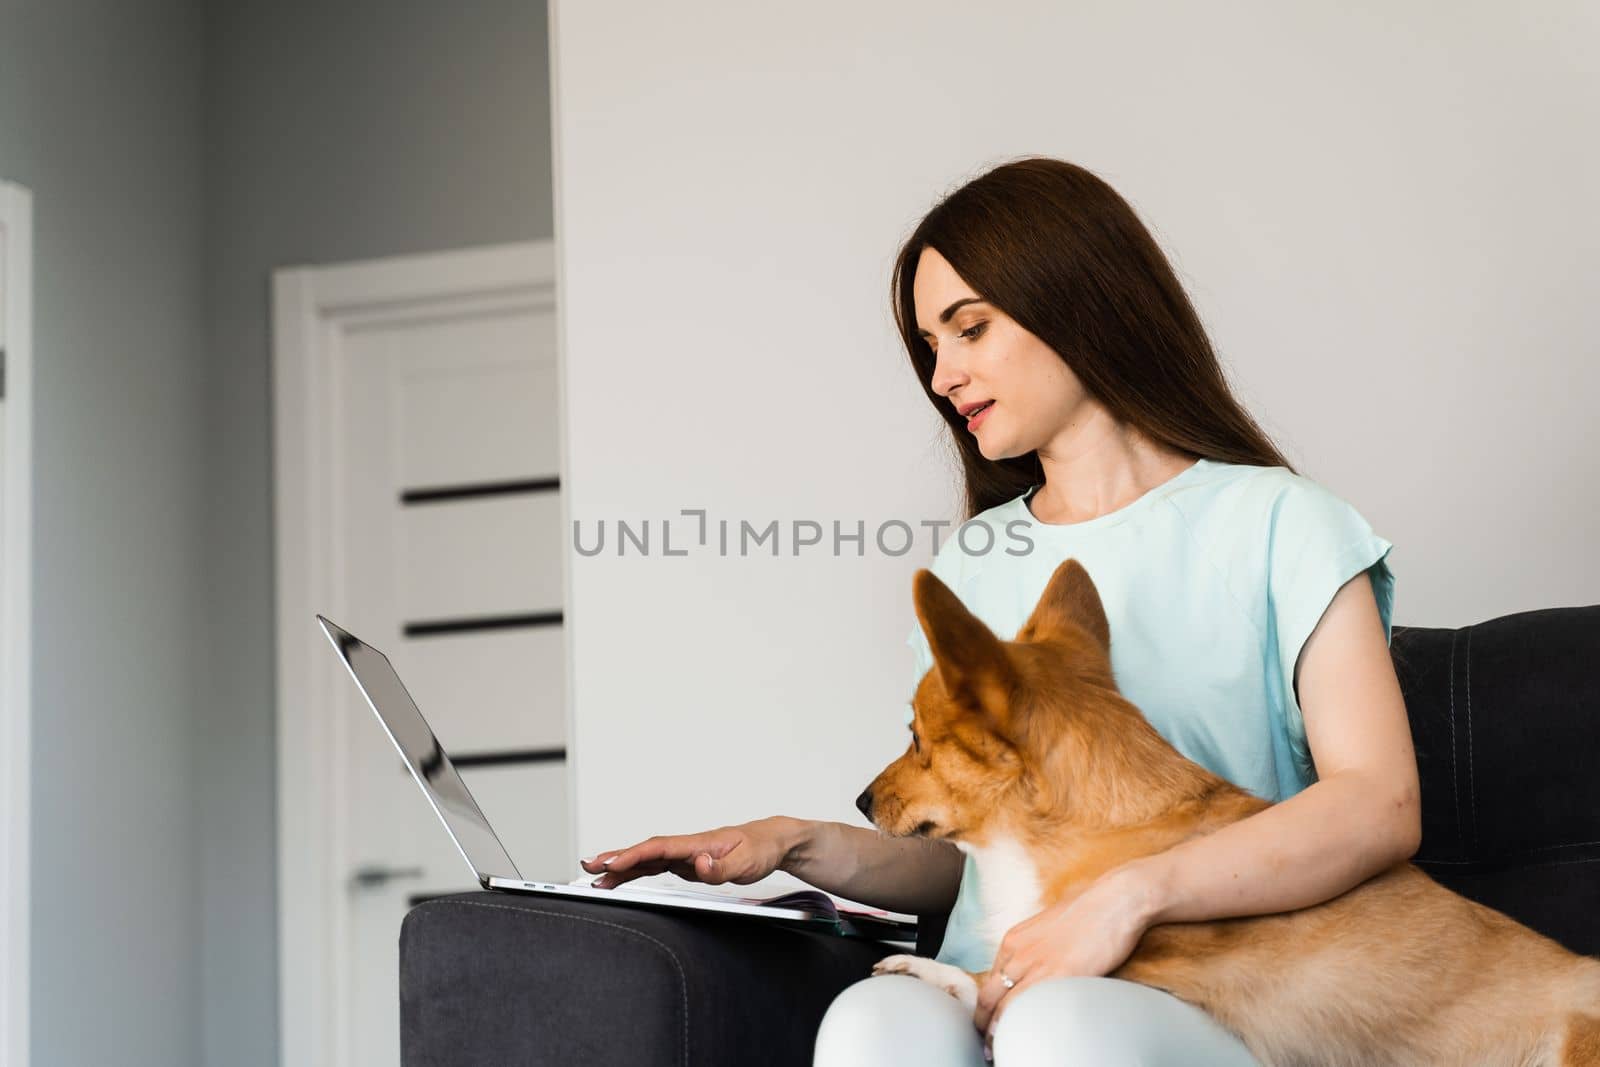 Attractive girl hug Corgi dog and have a rest at home. Girl and her domestic pet sit on the sofa and watching film on laptop together. Lifestyle with Welsh Corgi Pembroke